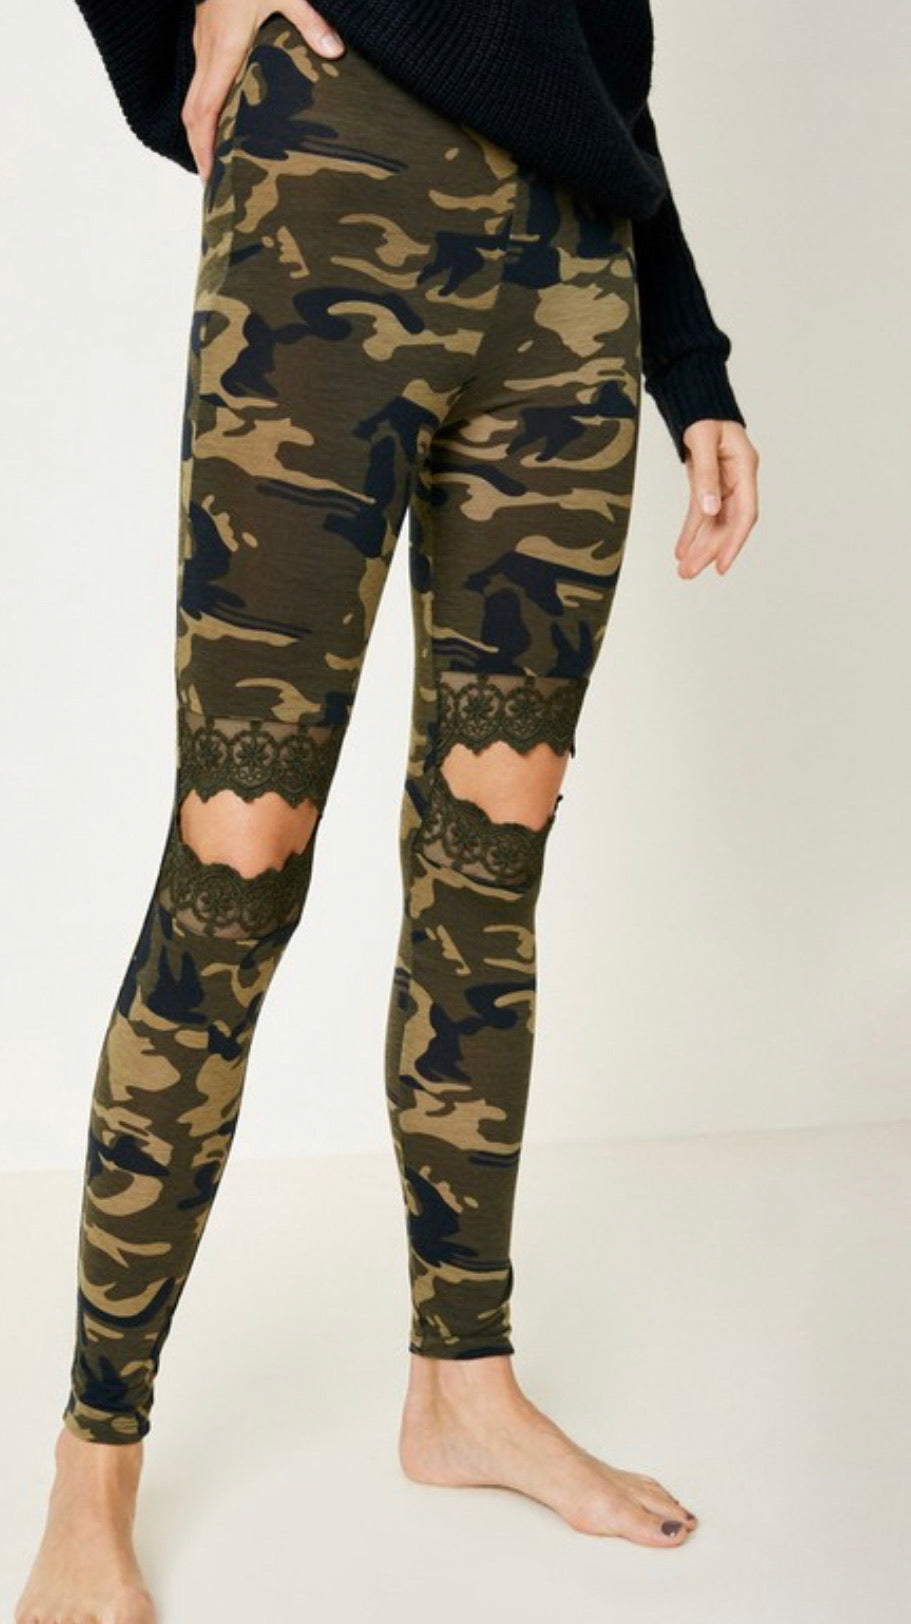 Girls’ Camo Leggings - Arrows, Bows & Lil Toes 